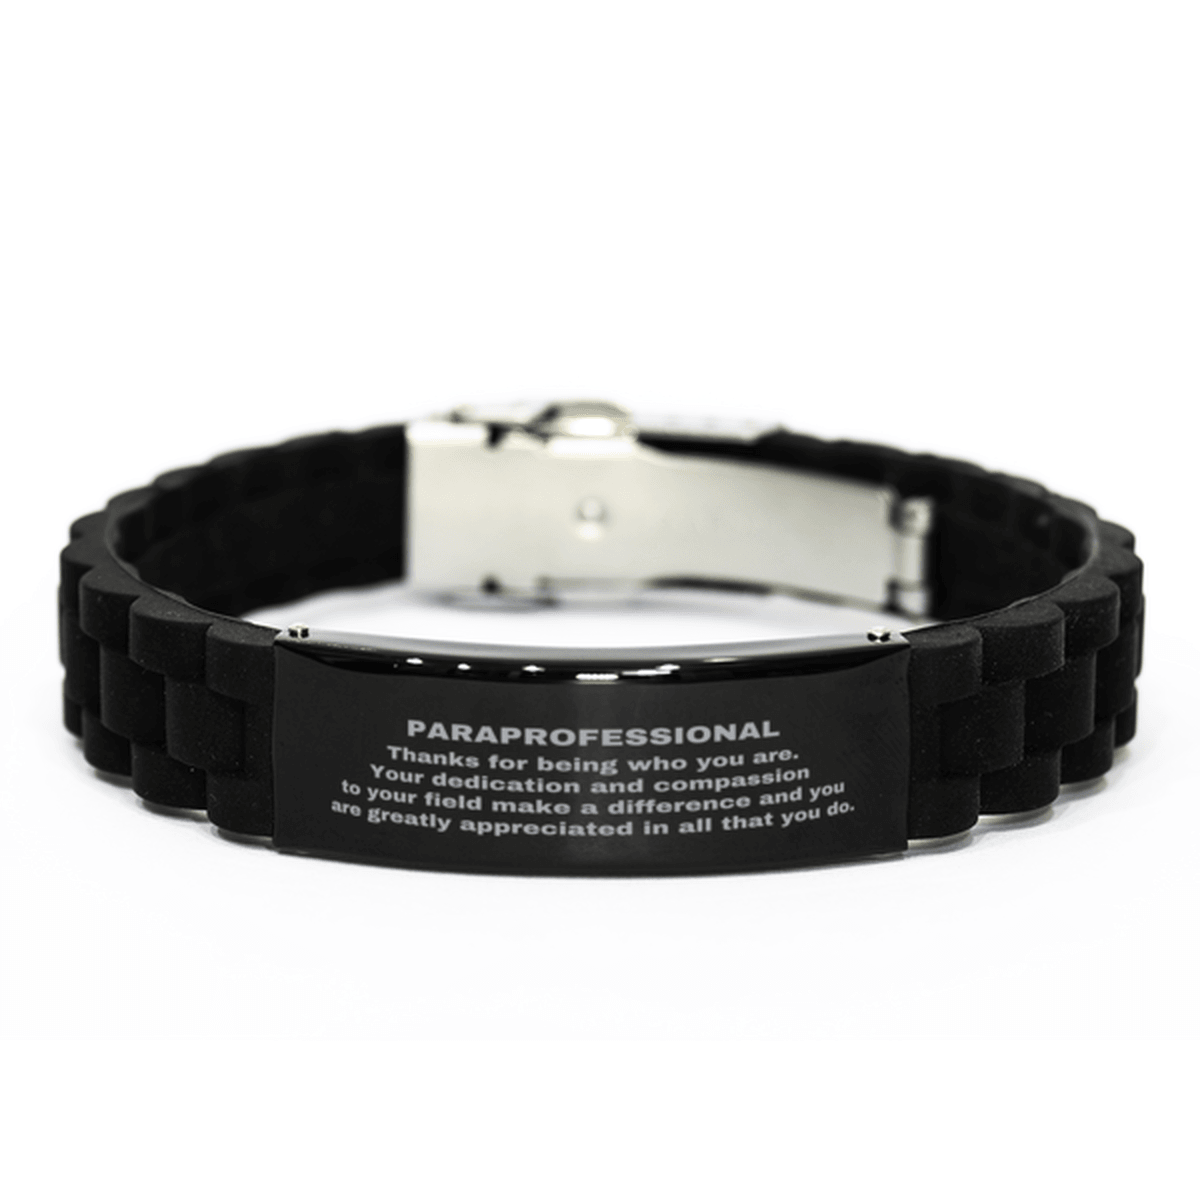 Paraprofessional Black Glidelock Clasp Engraved Bracelet - Thanks for being who you are - Birthday Christmas Jewelry Gifts Coworkers Colleague Boss - Mallard Moon Gift Shop